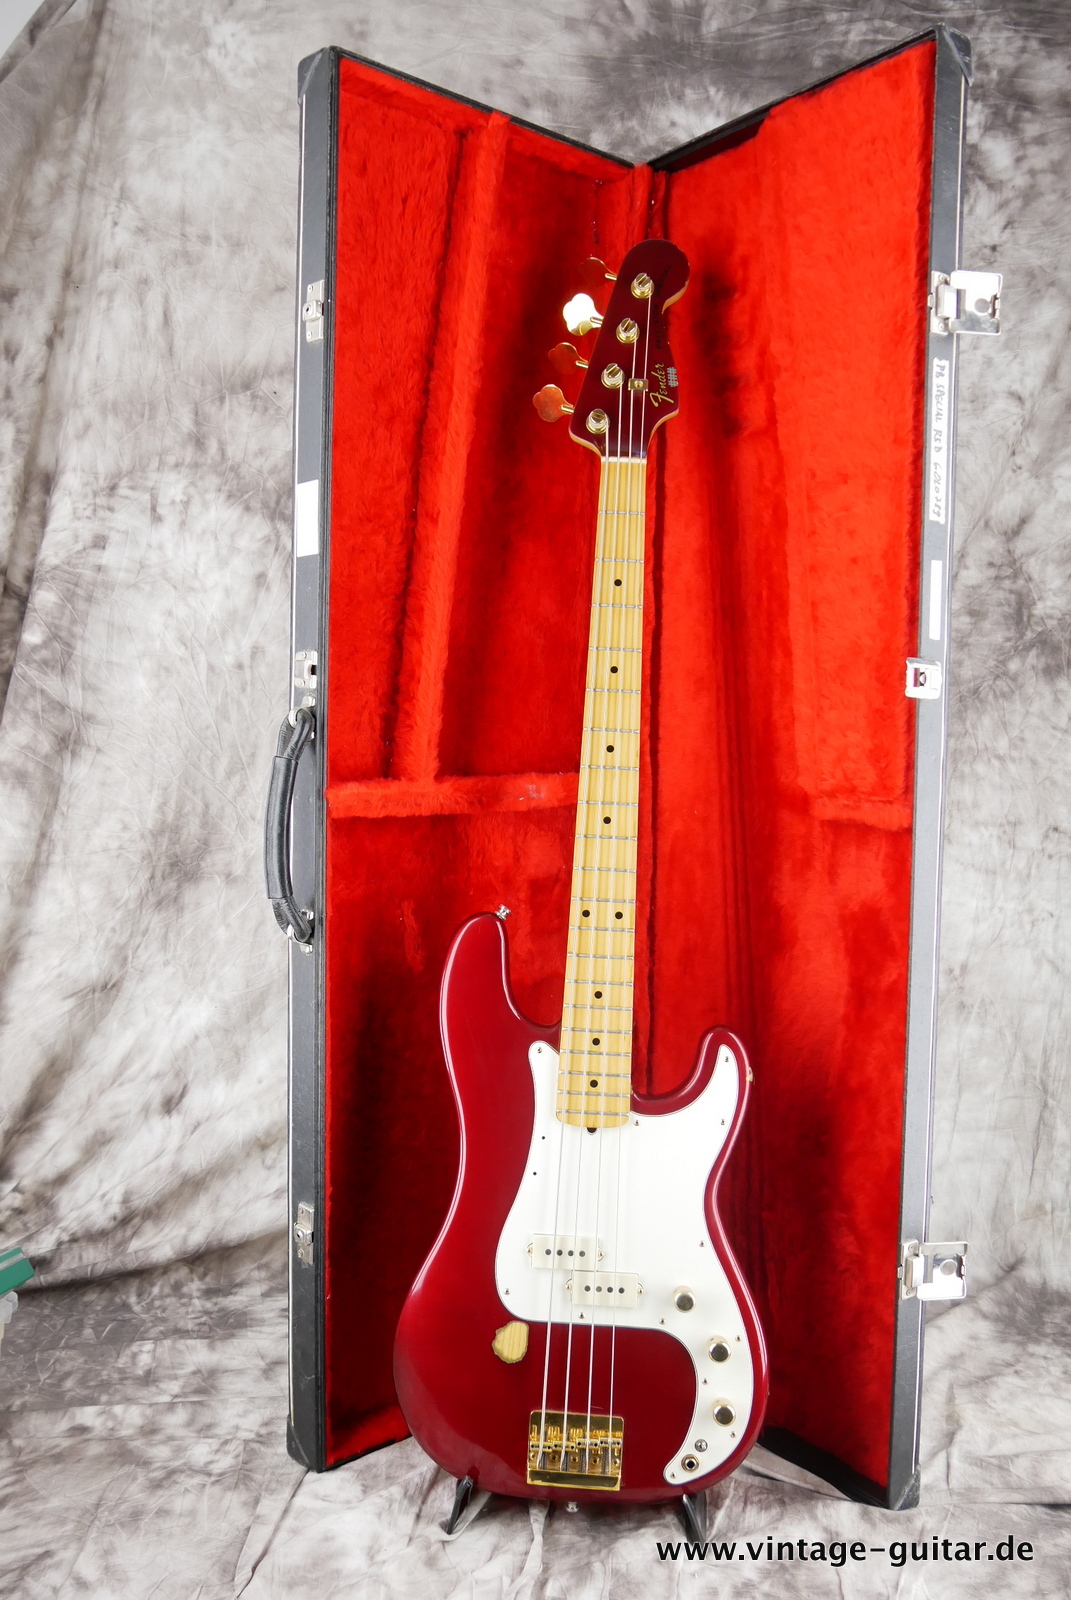 Fender_Precision_Special_USA_candy_apple_red_1982-014.JPG